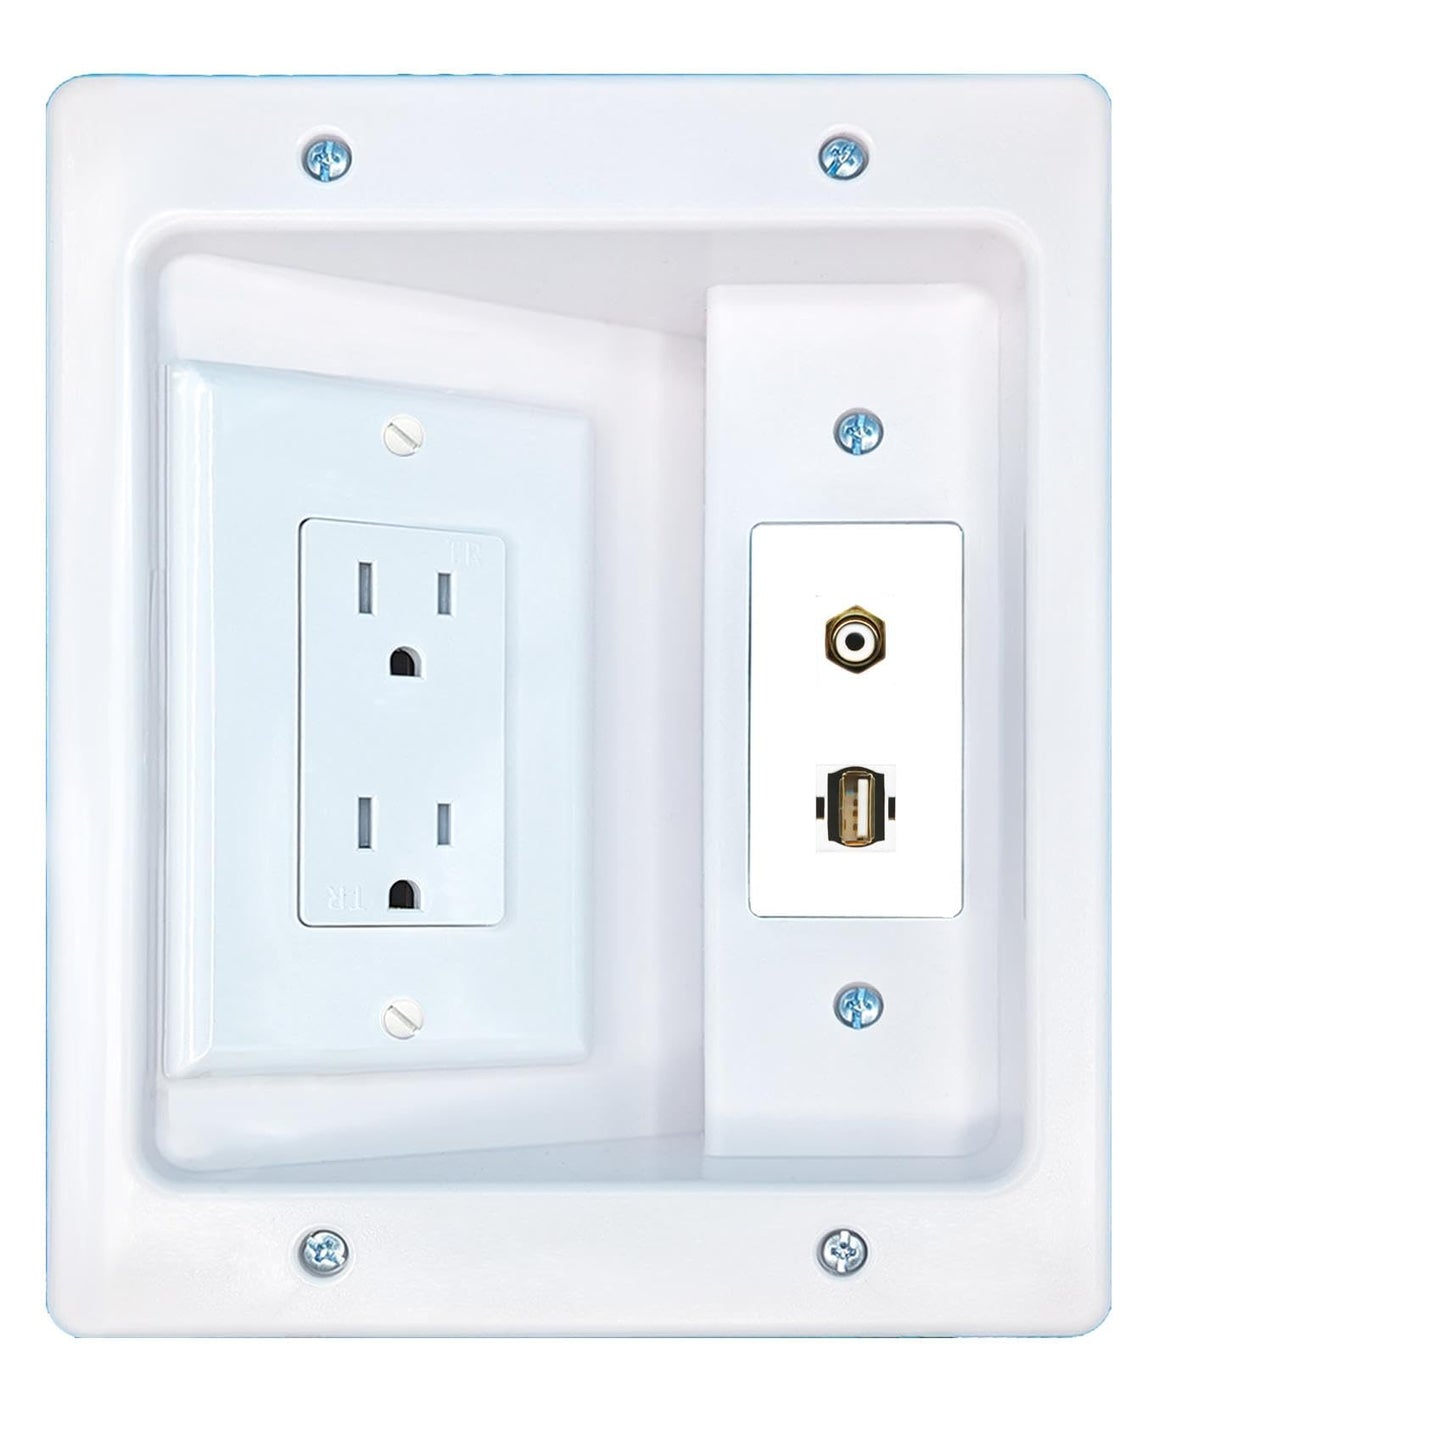 RiteAV RCA-White USB2 Recessed Wall Plate Cable Concealer Management Kit with Power Outlet Hides Cords and Cables